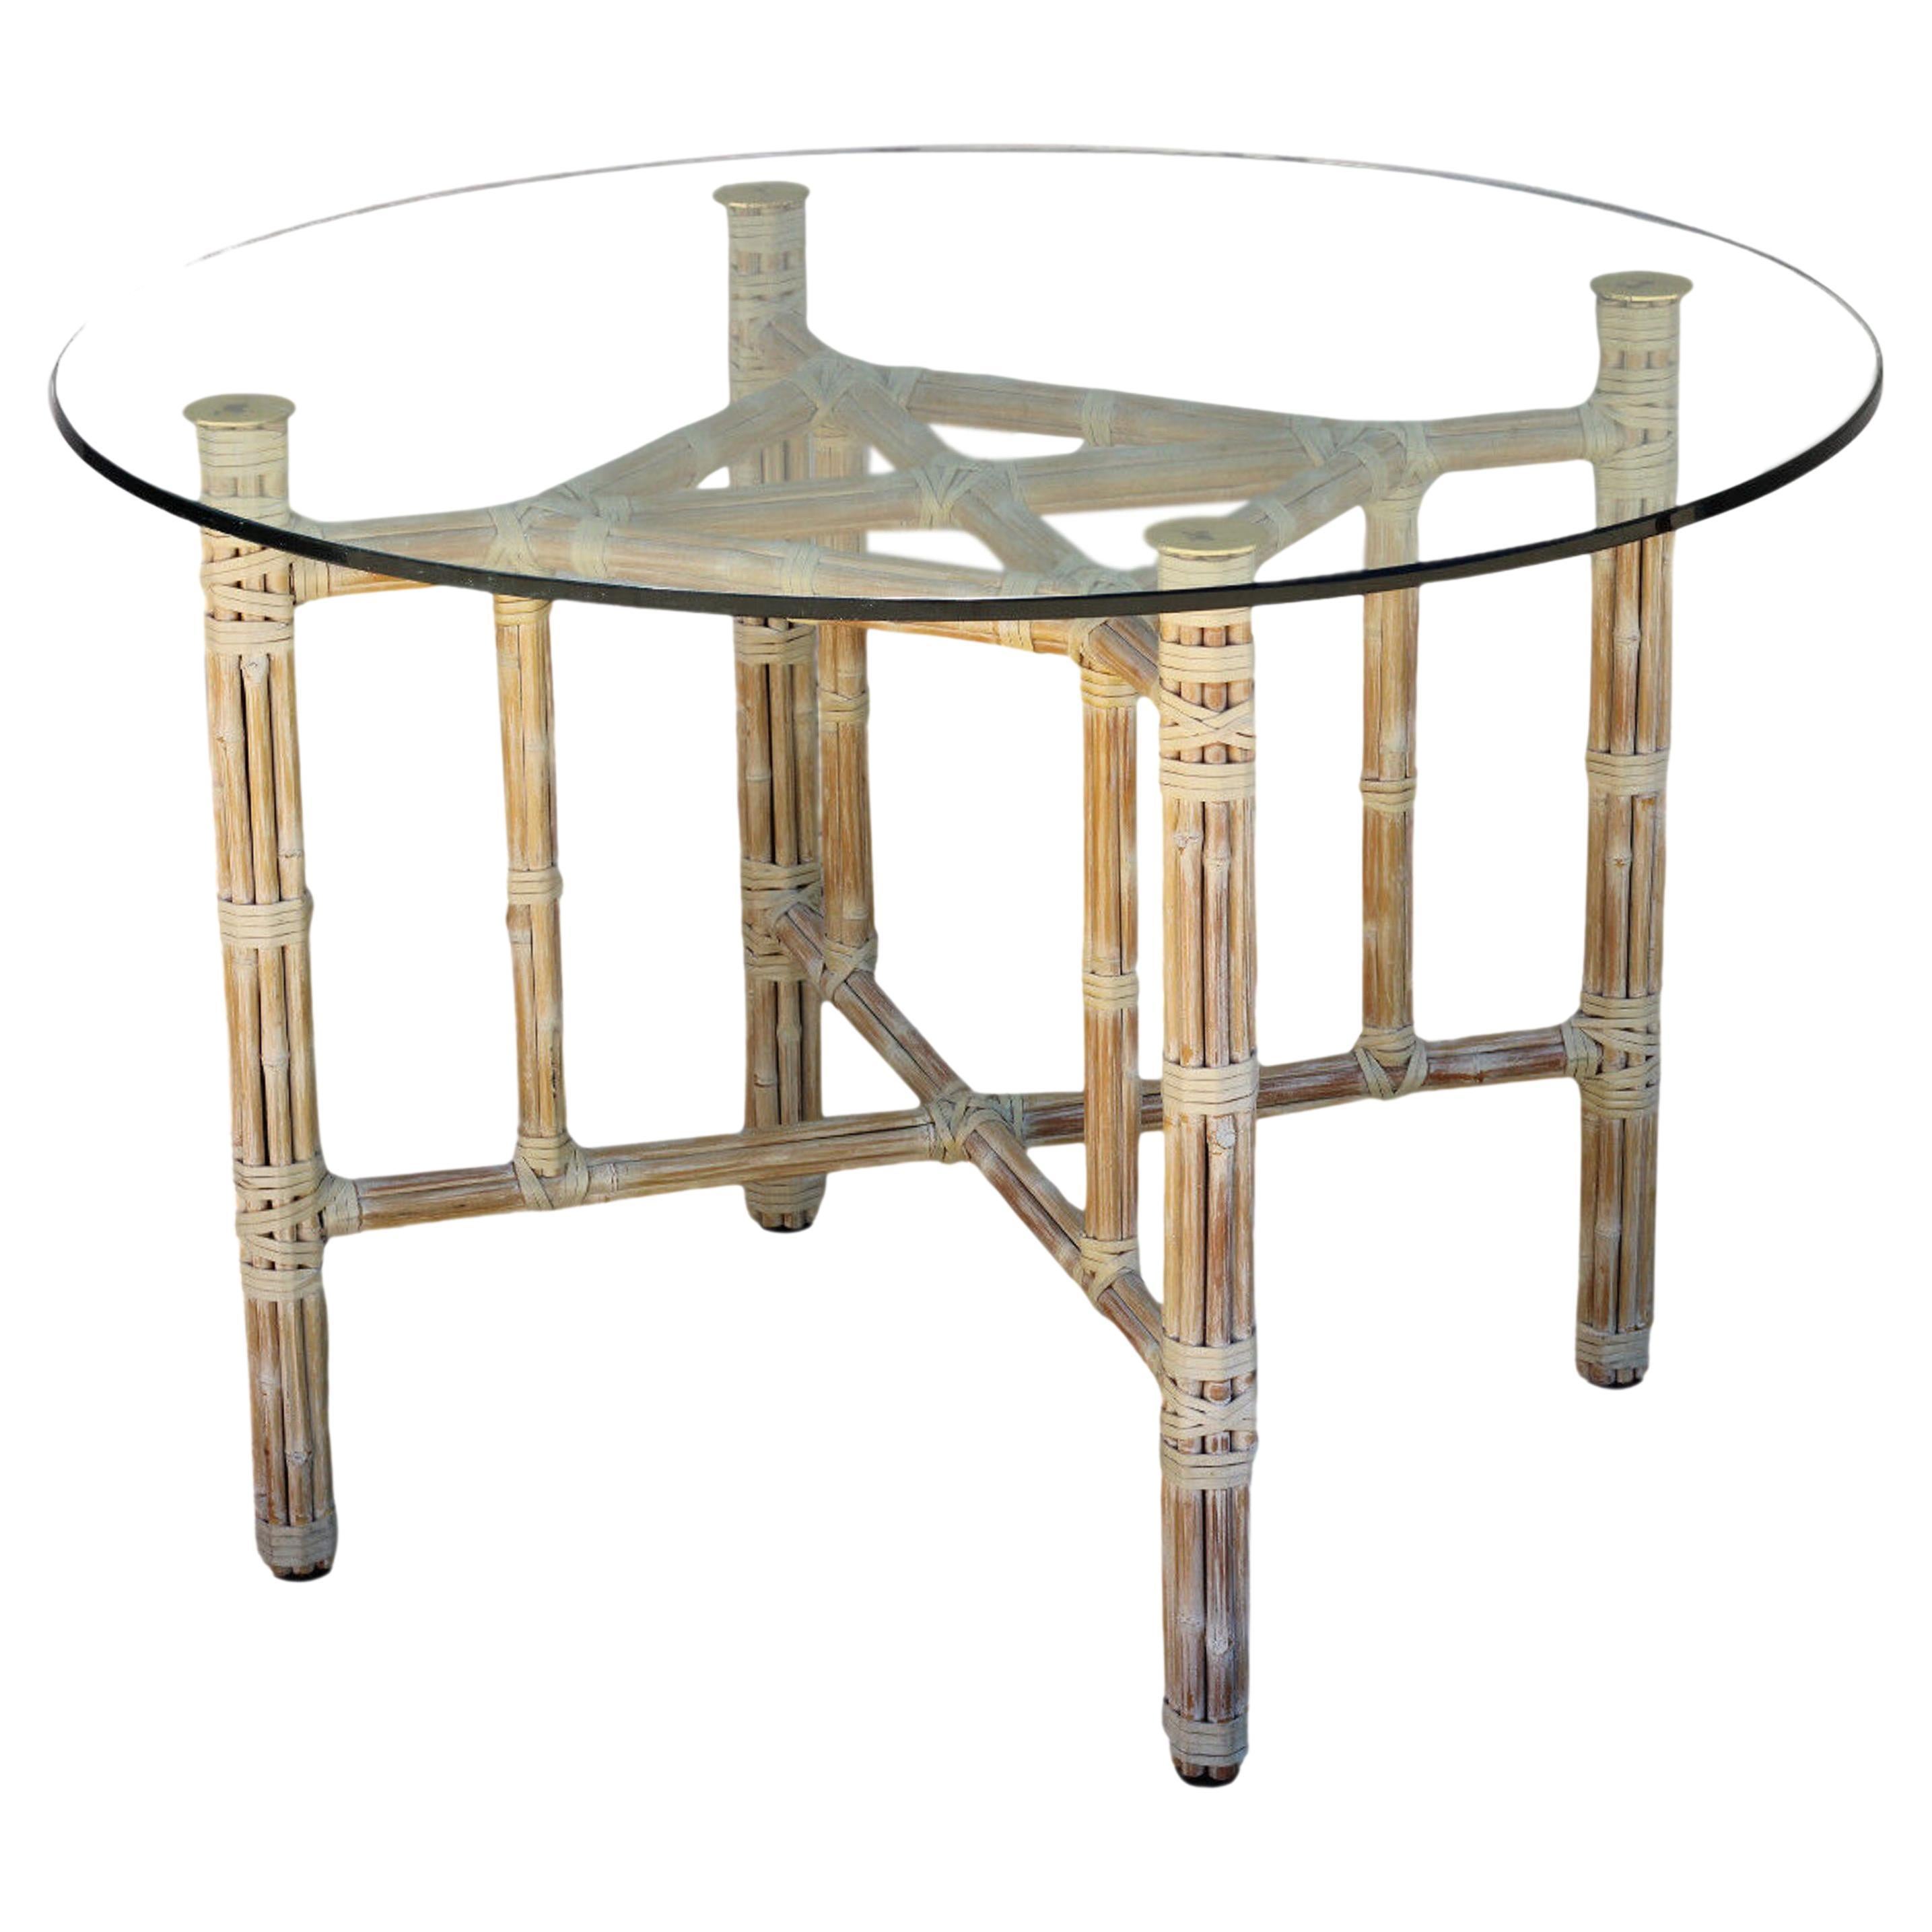 McGuire Organic Modern Bamboo Dining Table Base For Sale at 1stDibs